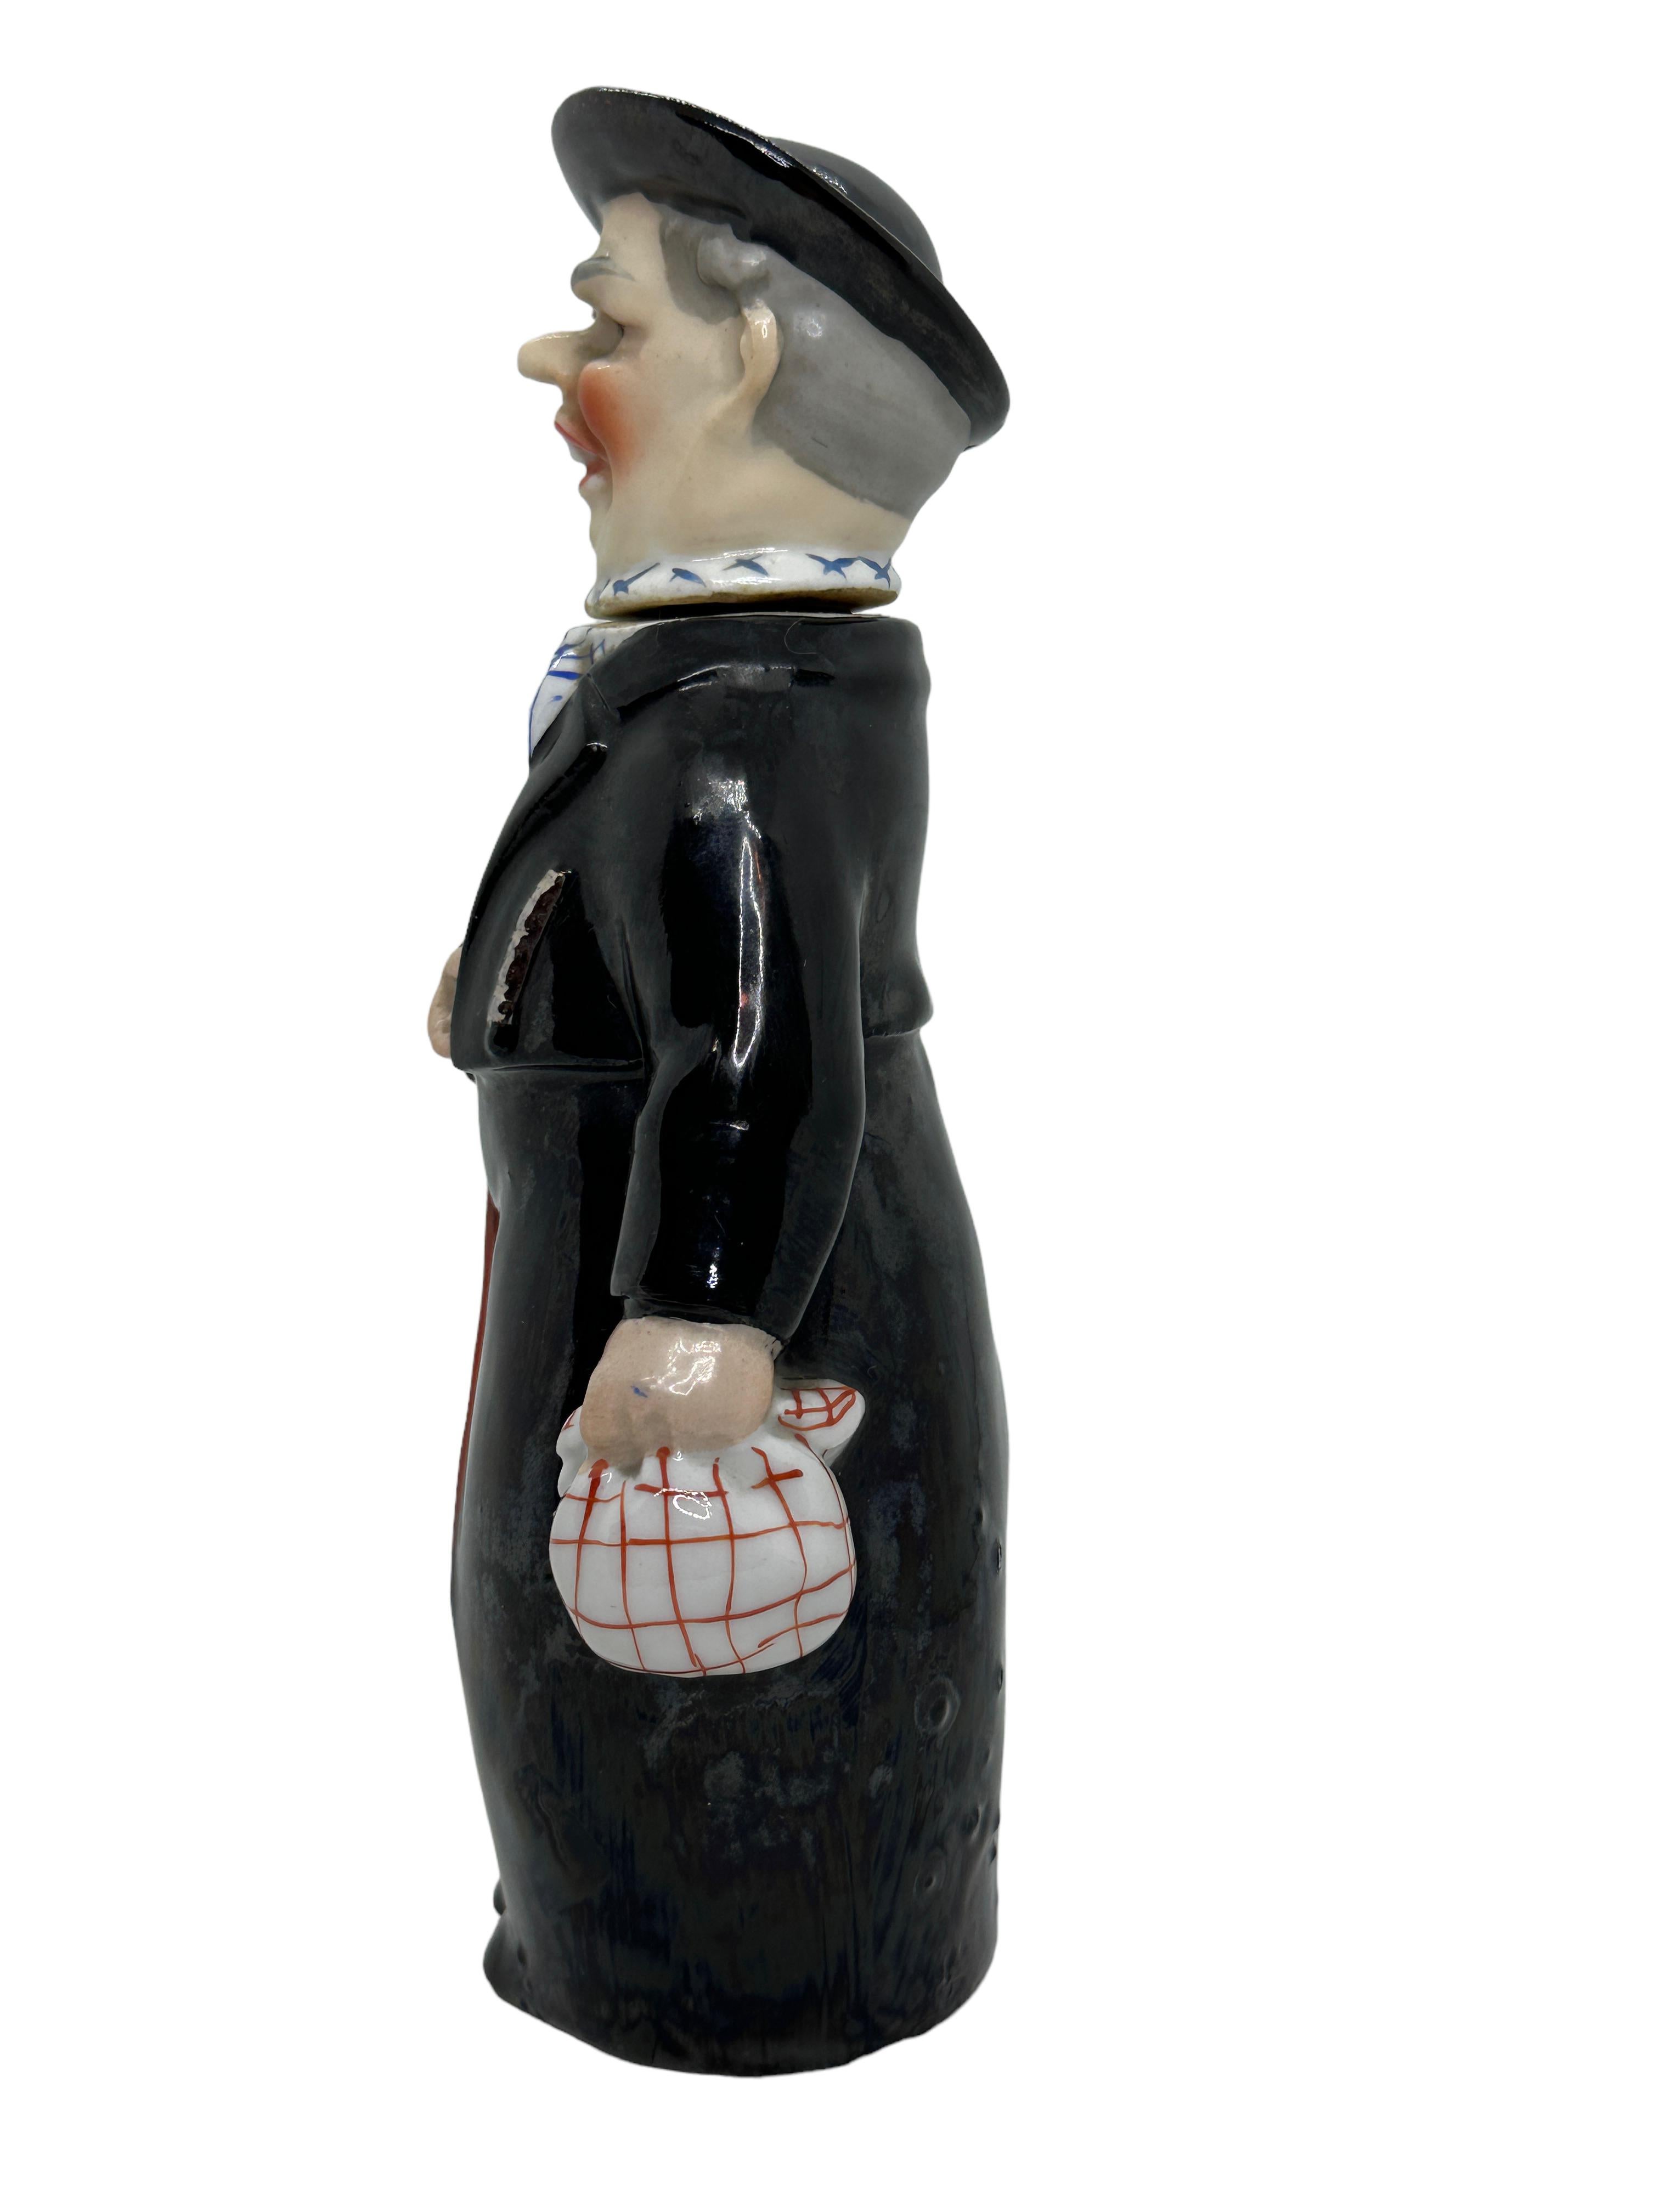 A gorgeous character bottle - traditional black forest Priest. This character bottle has been made in Germany circa 1910s or older, attributed to E. Bohne, Thuringia Germany. Absolutely gorgeous piece hand painted and still in great condition. Nice